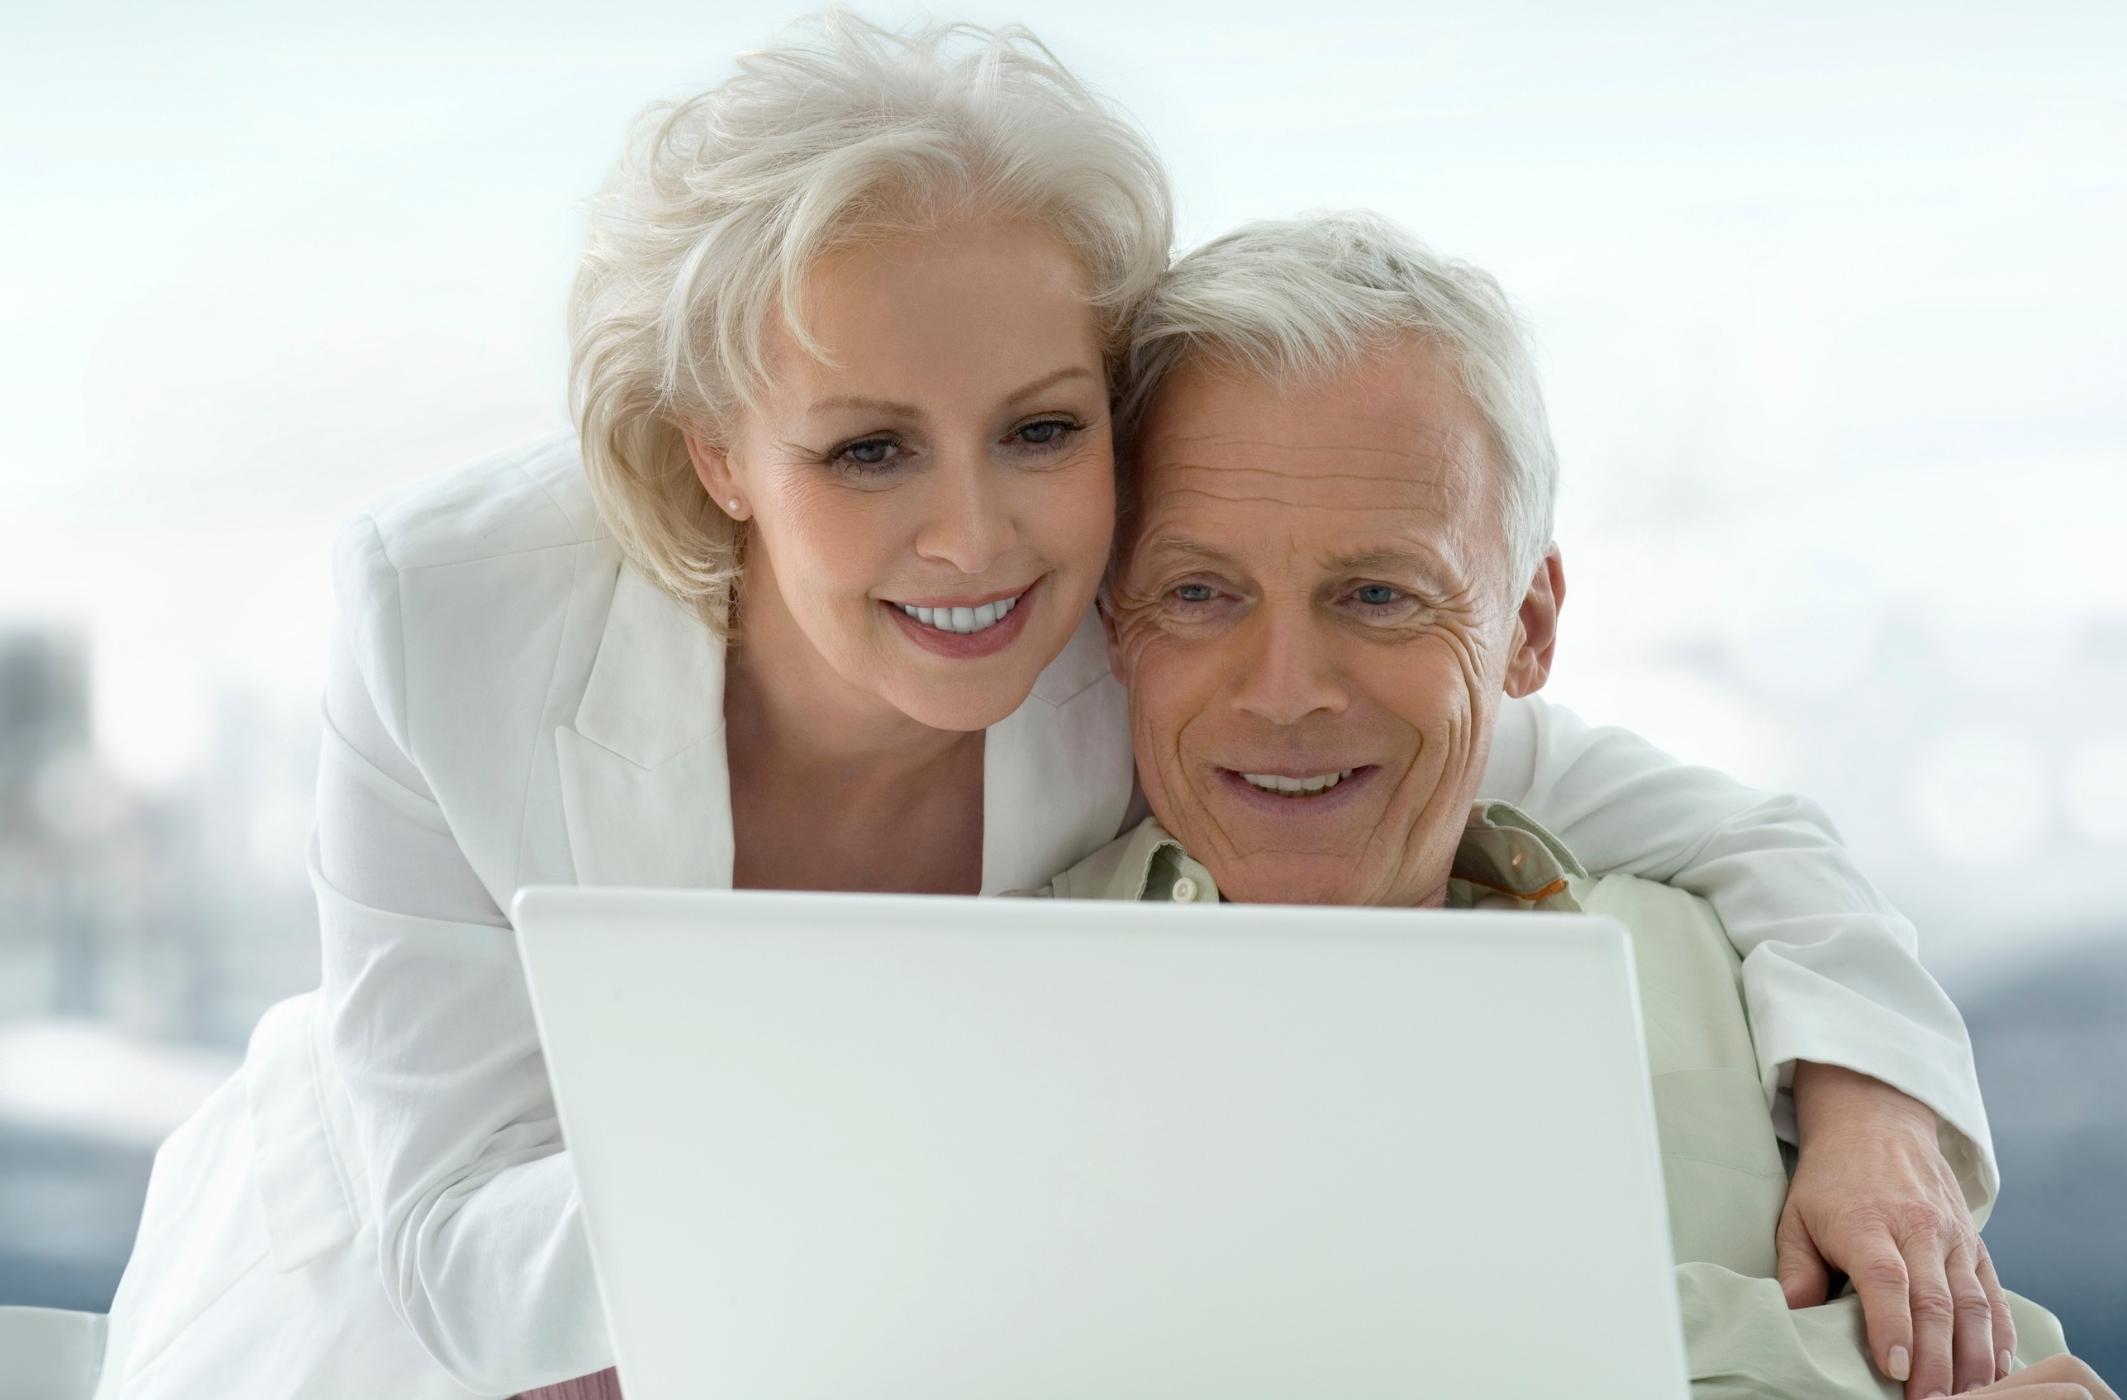 Retirement planning and advice for retirees